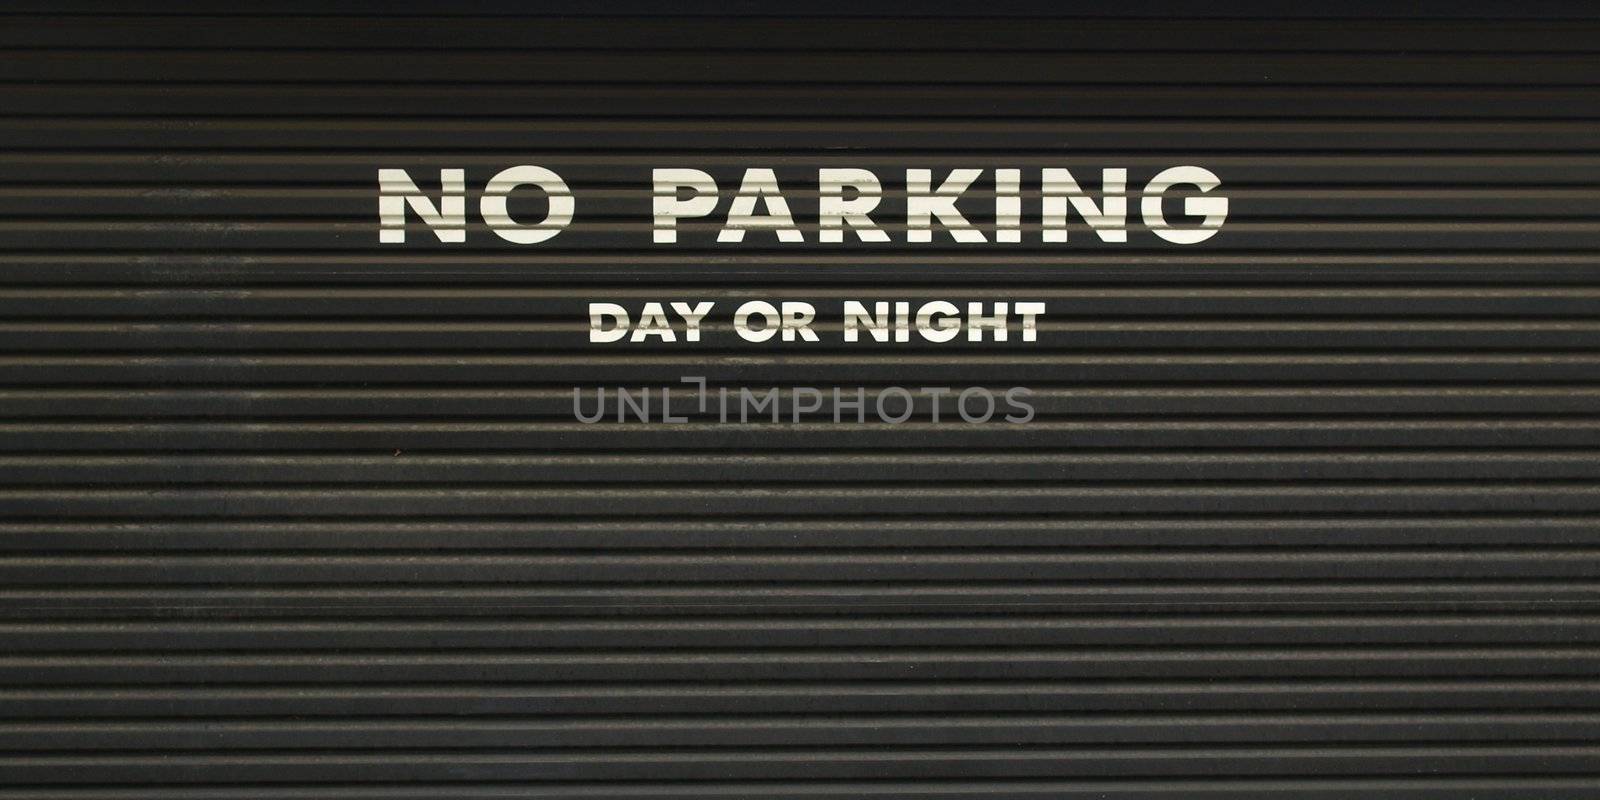 A road sign for a no parking area